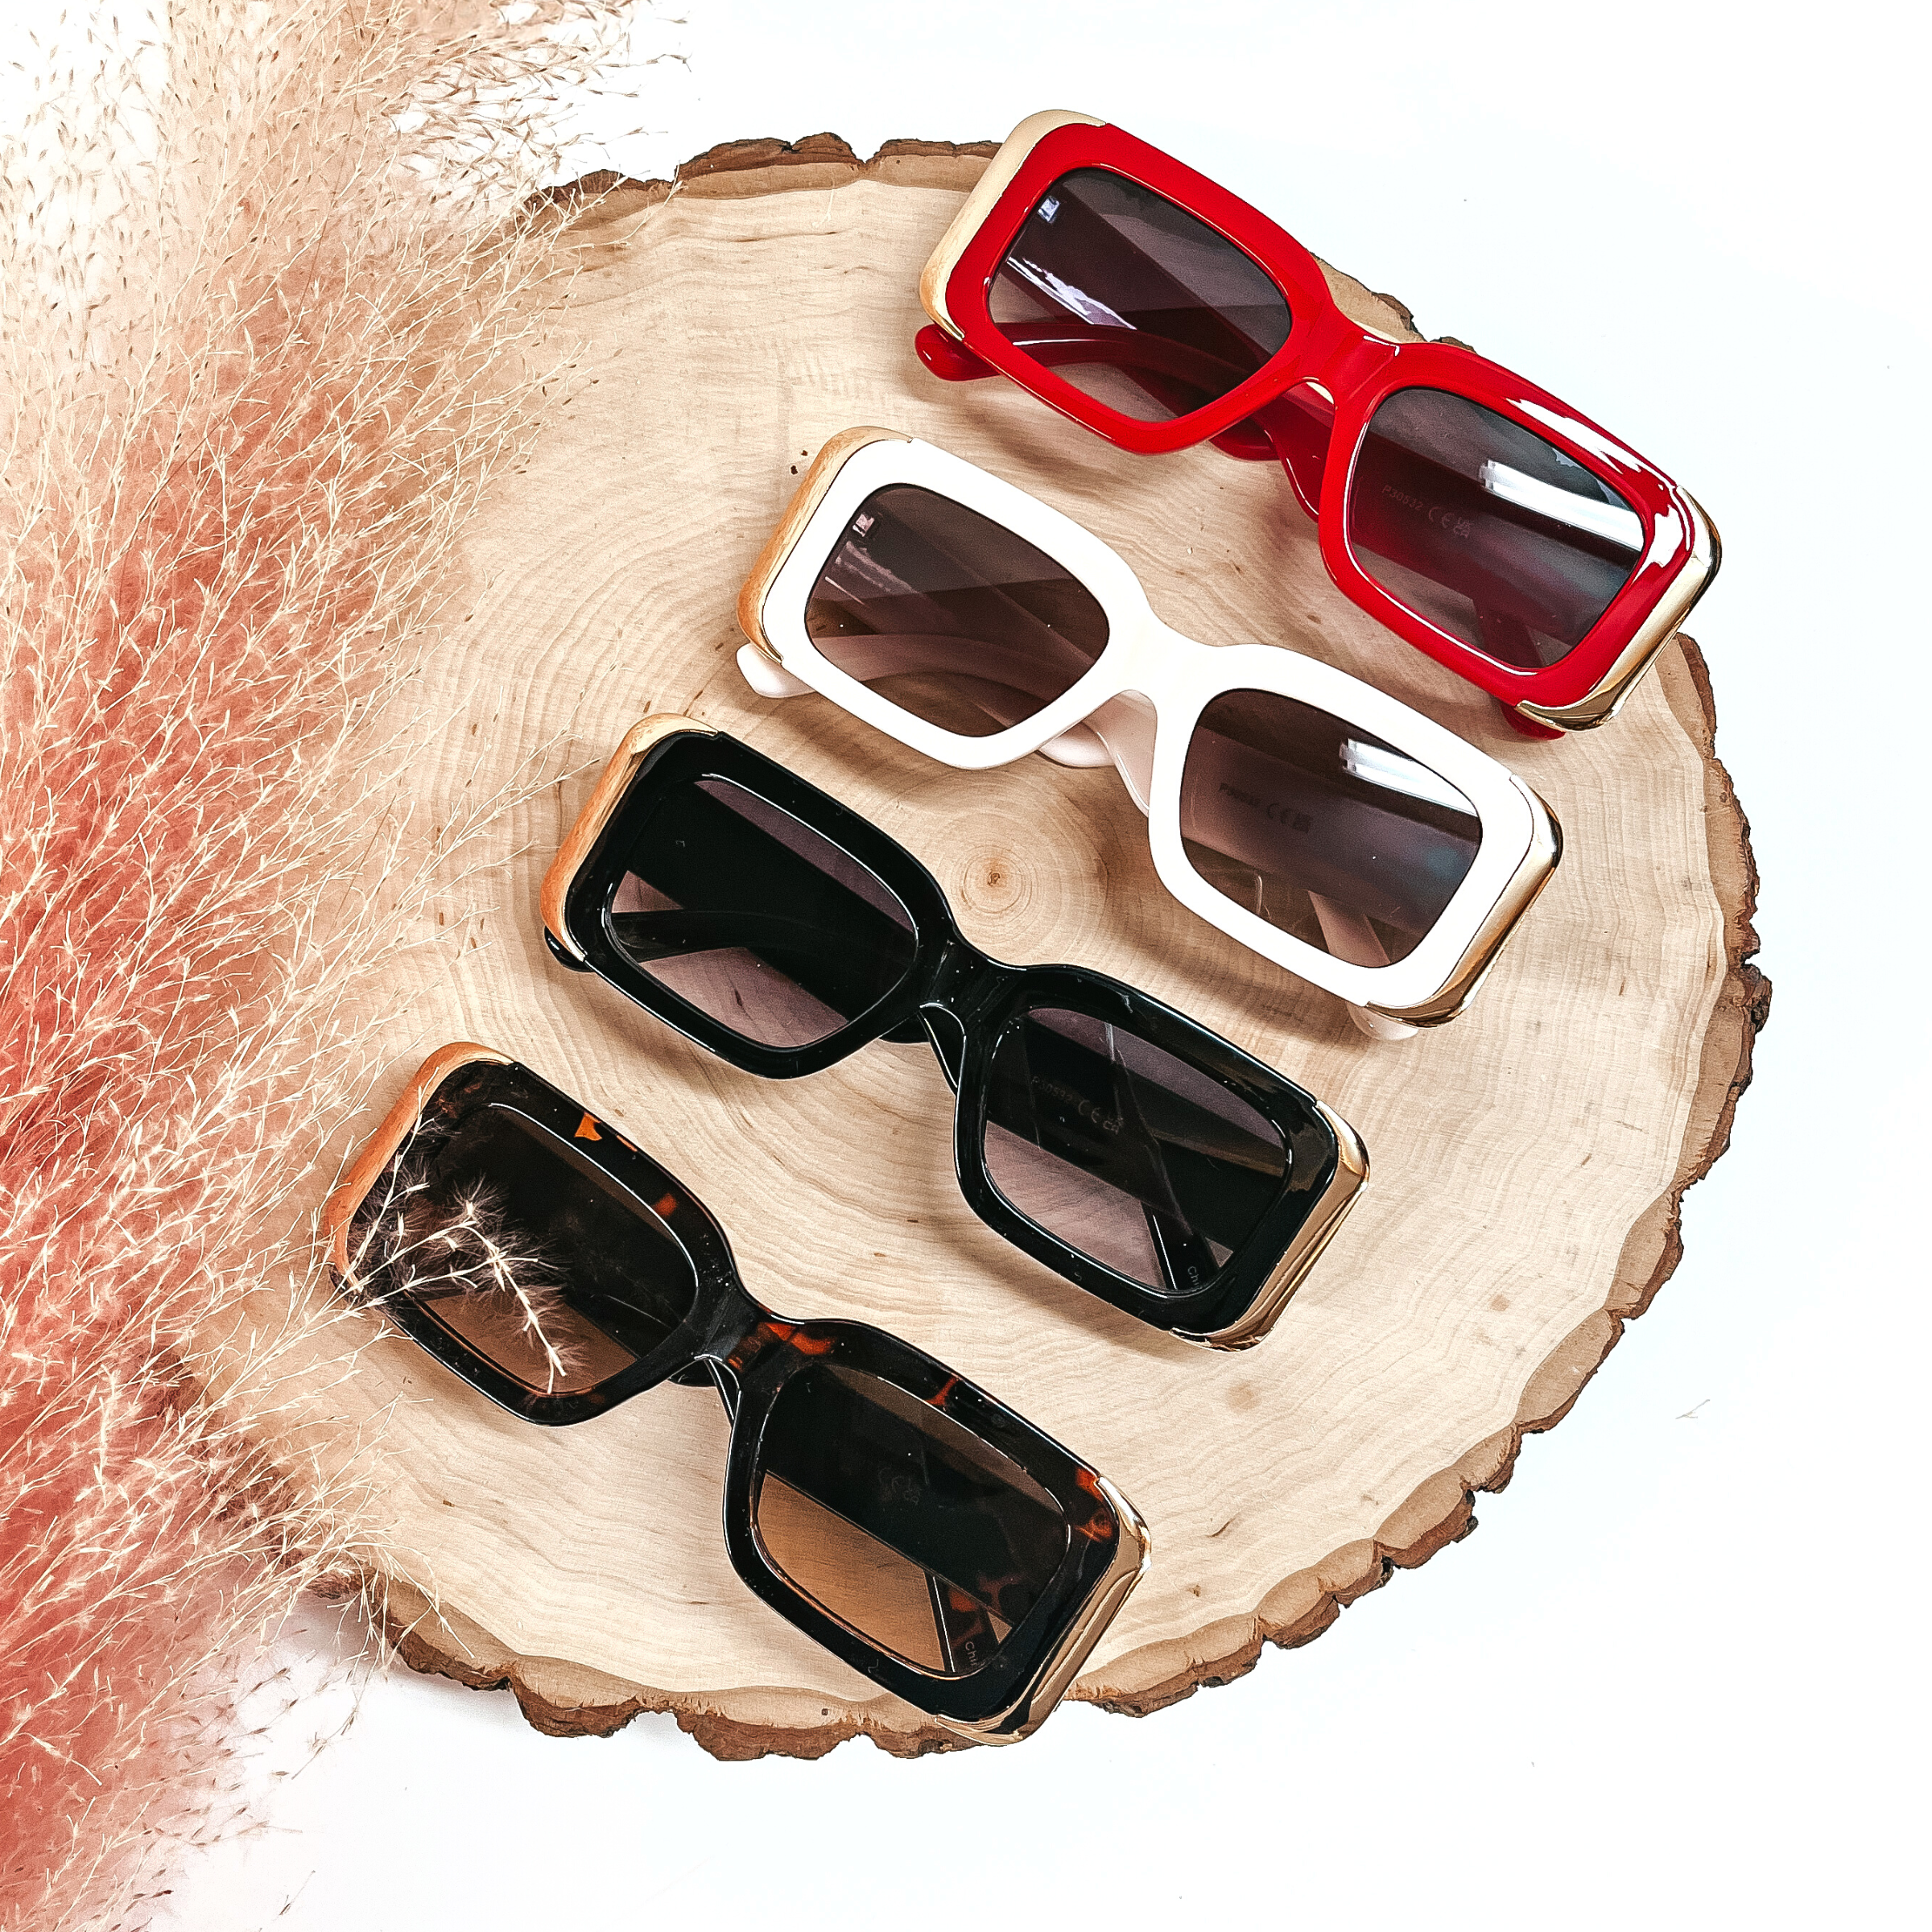 There are four rectangle sunglasses in different colors laying on a slab of wood with a pink plant in the side as decor. From top to bottom; red frames/brown lenses/gold detailing, ivory frames/brown lenses/gold detailing, black frame/black lenses/gold detailing, tortoise print frame/brown lenses/gold detailing. 